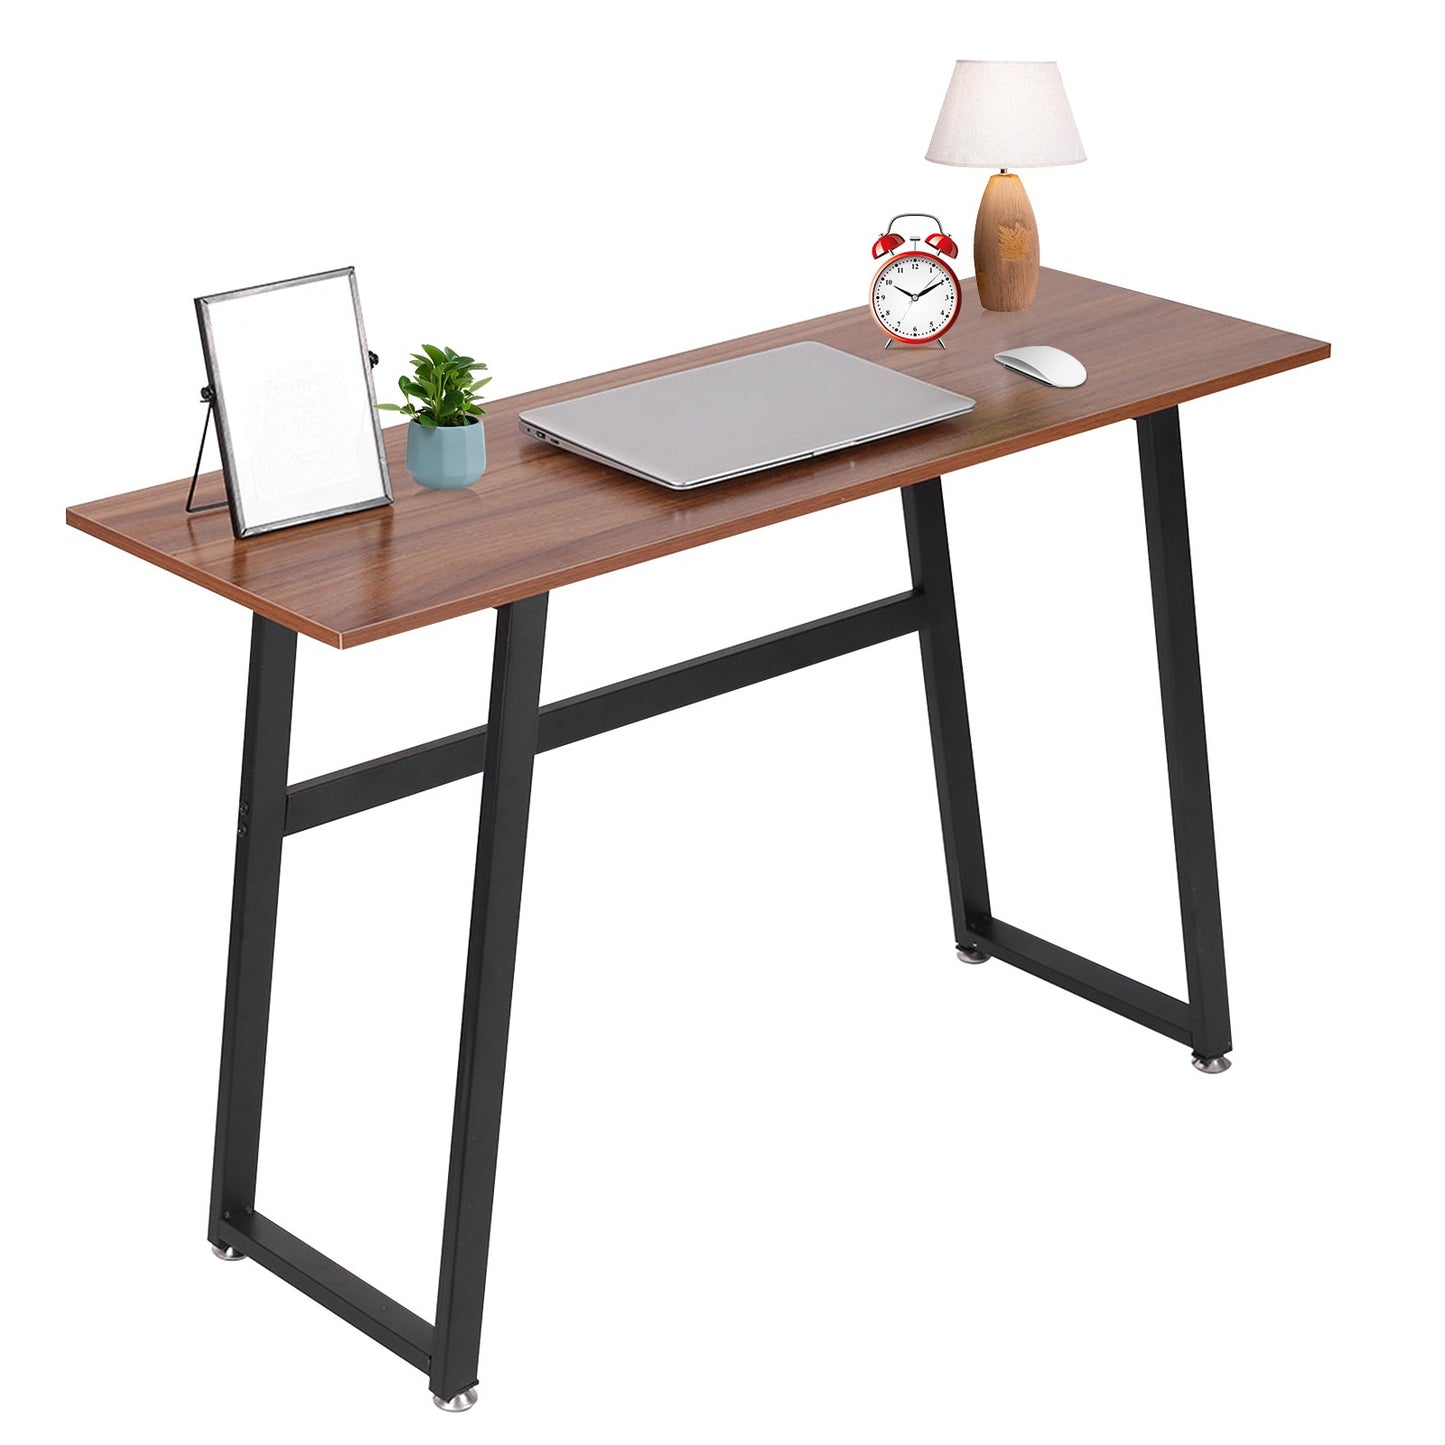 Modern Computer Desk Wood And Metal Writing Desk Home Office Study Table